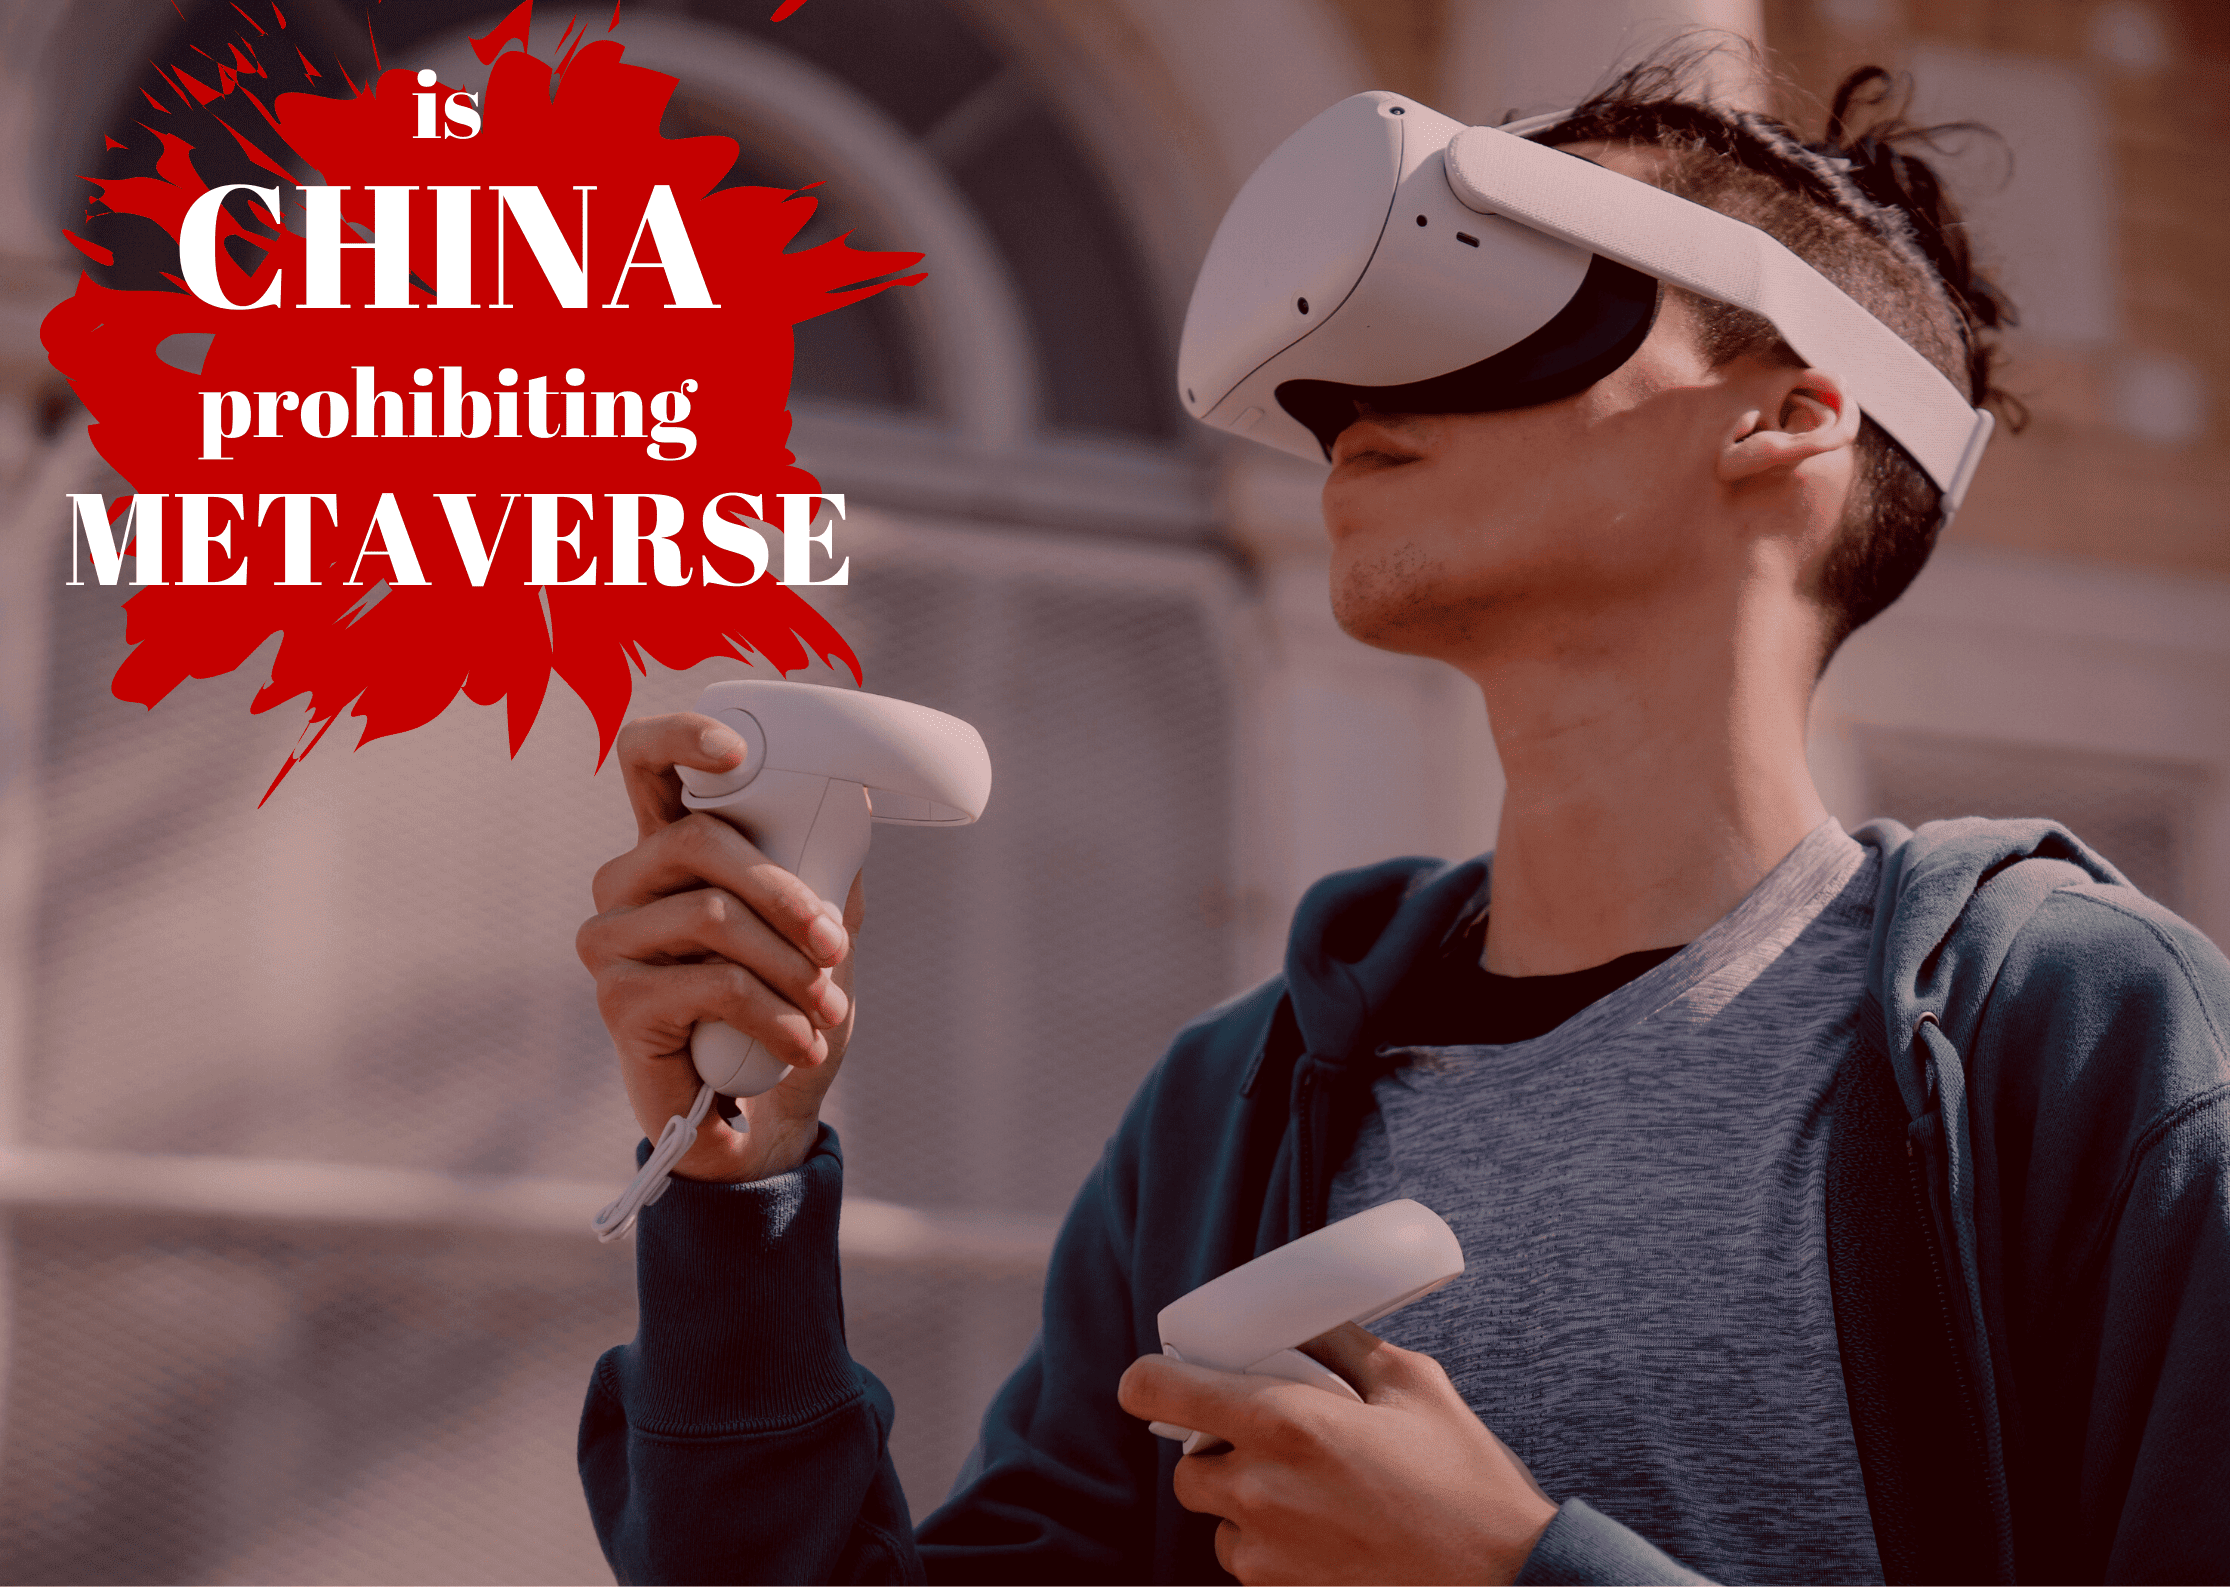 China's Threat to Spy on the Metaverse